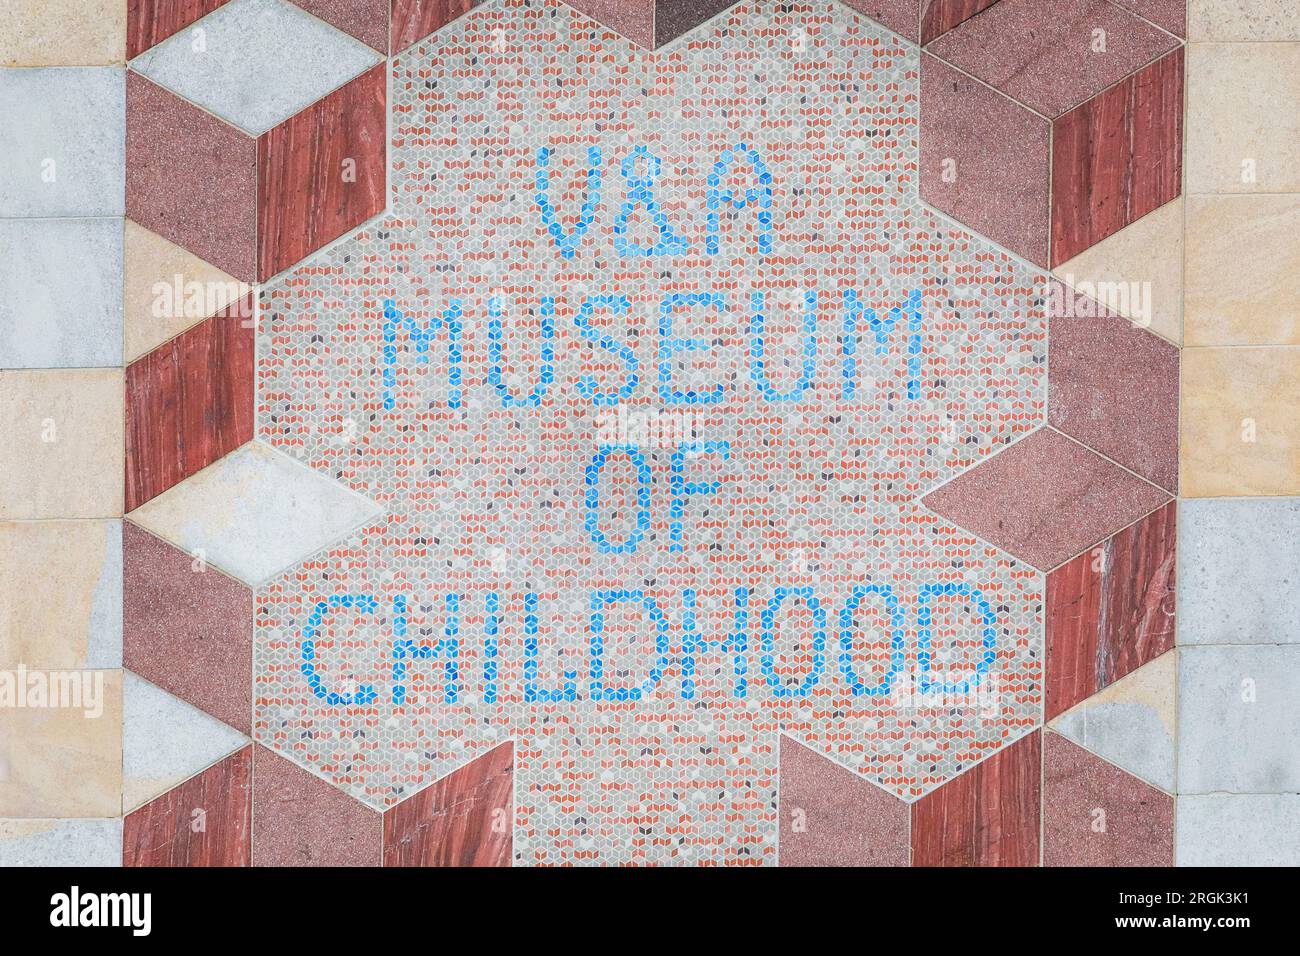 The V&A Museum of Childhood, now the Young V&A, mosaic sign on the outside facade of the building, Bethnal Green, London Stock Photo